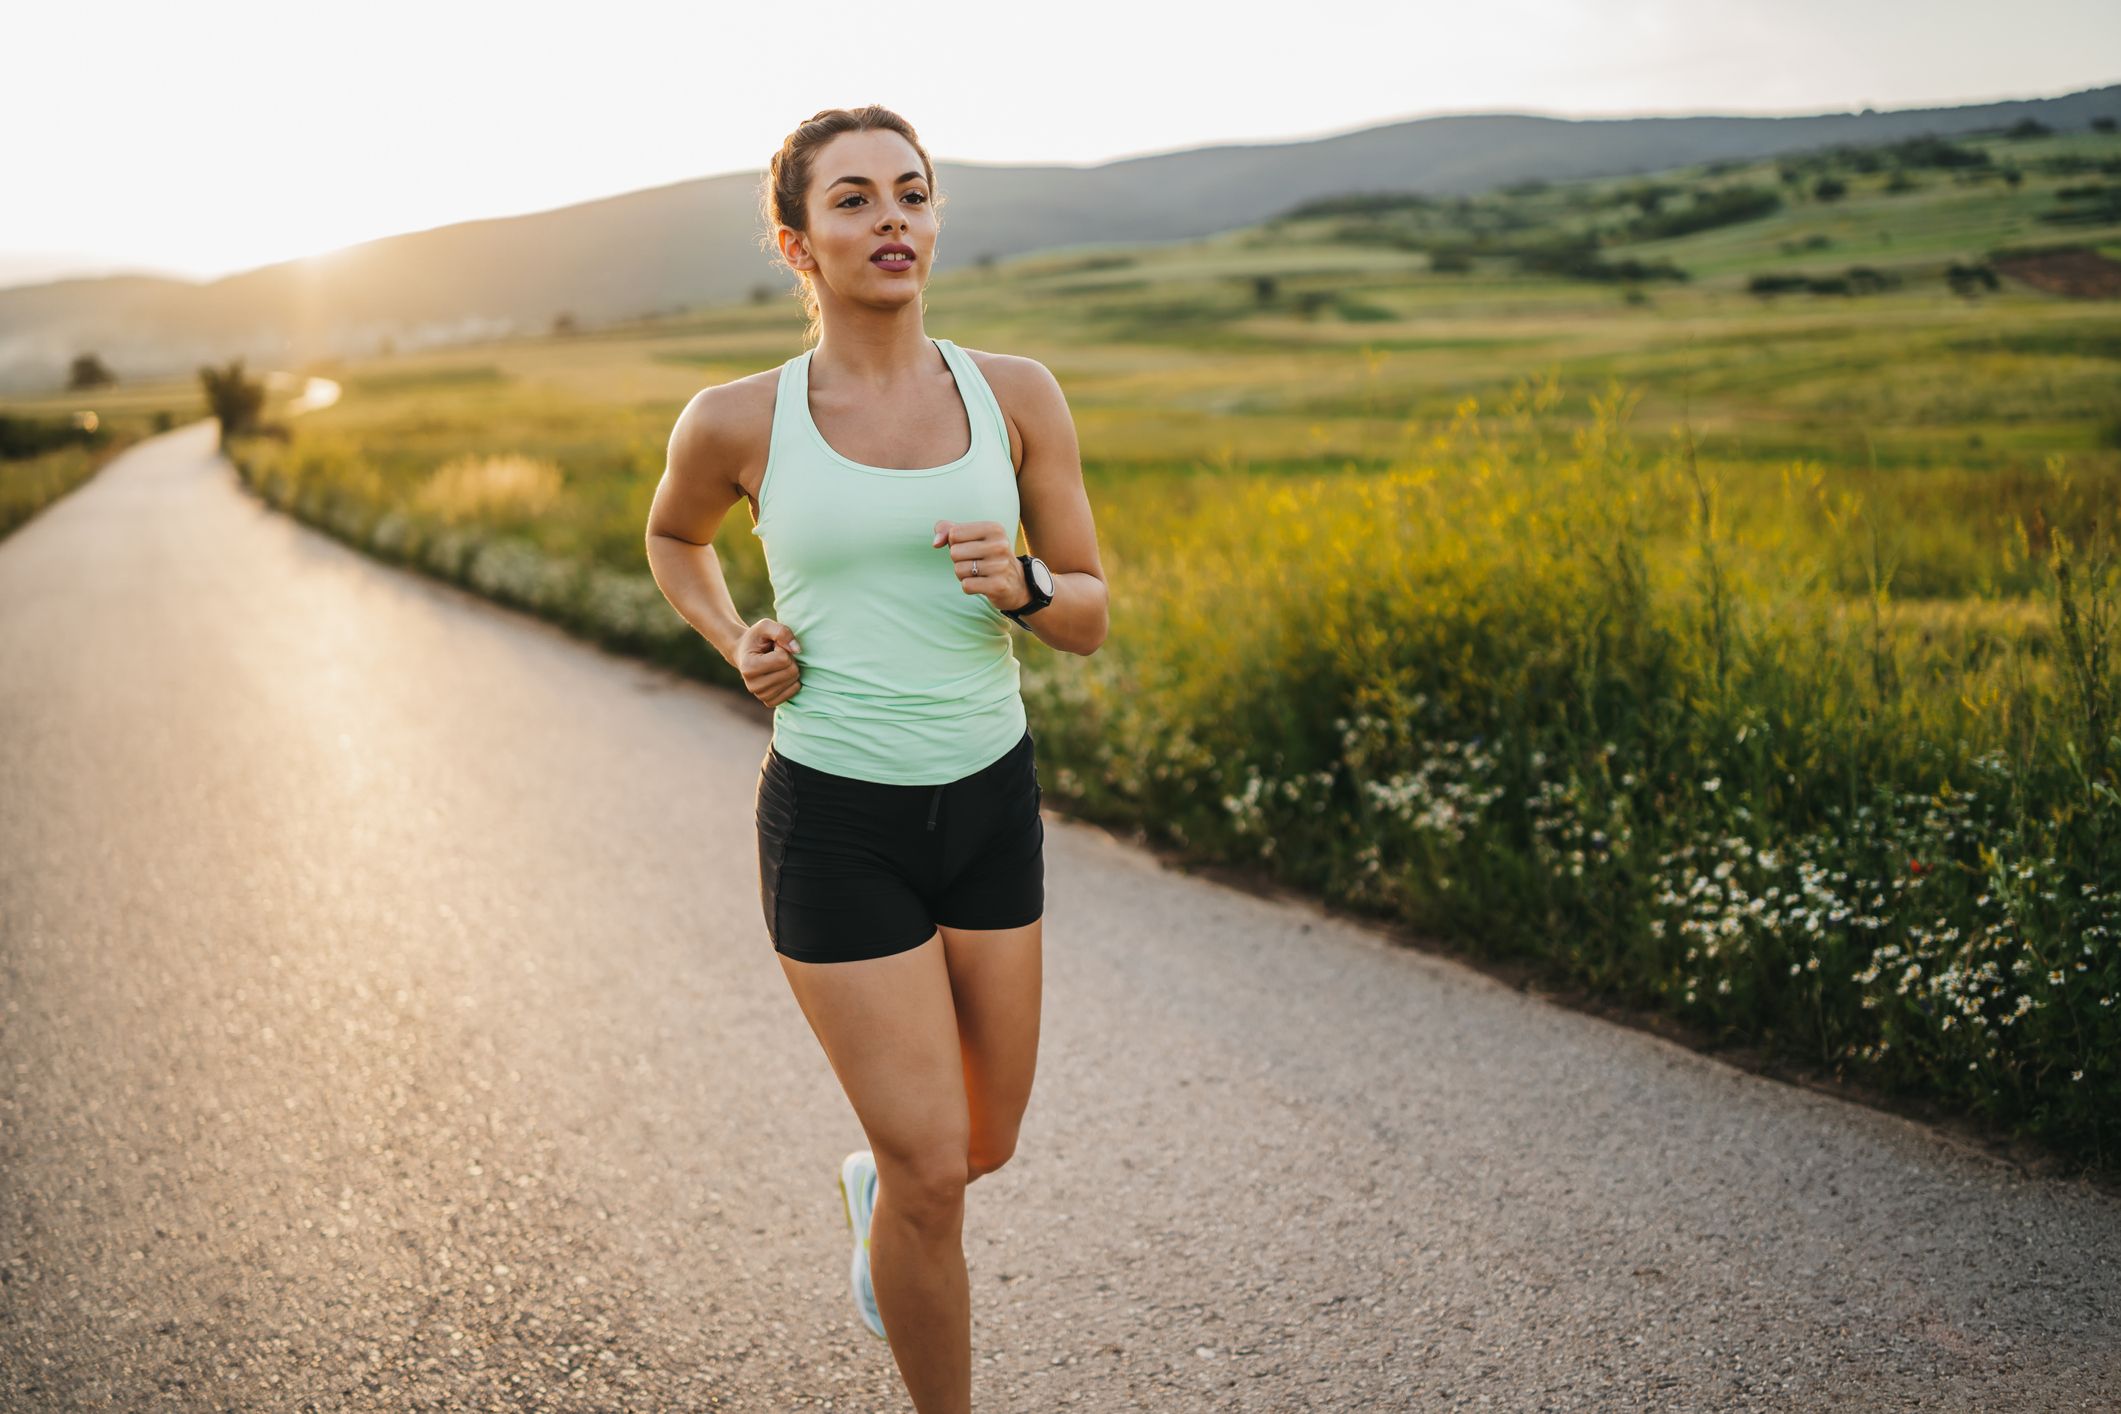 6 Secrets to Running Faster: How to Increase Your Running Speed